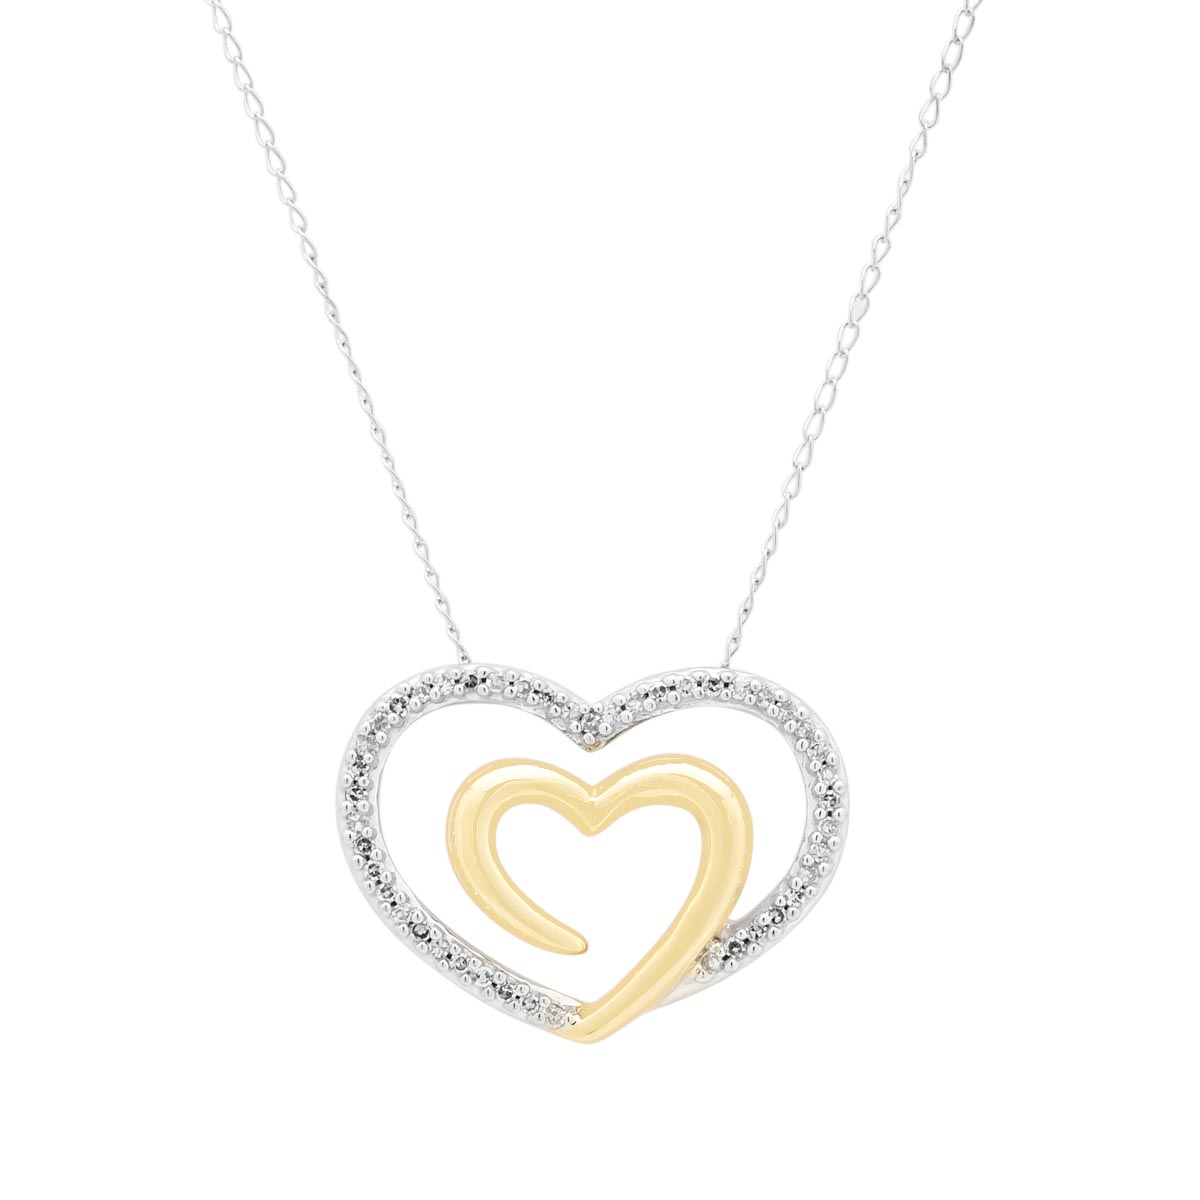 Estate Diamond Heart Necklace in 14kt White and Yellow Gold (1/5ct tw)